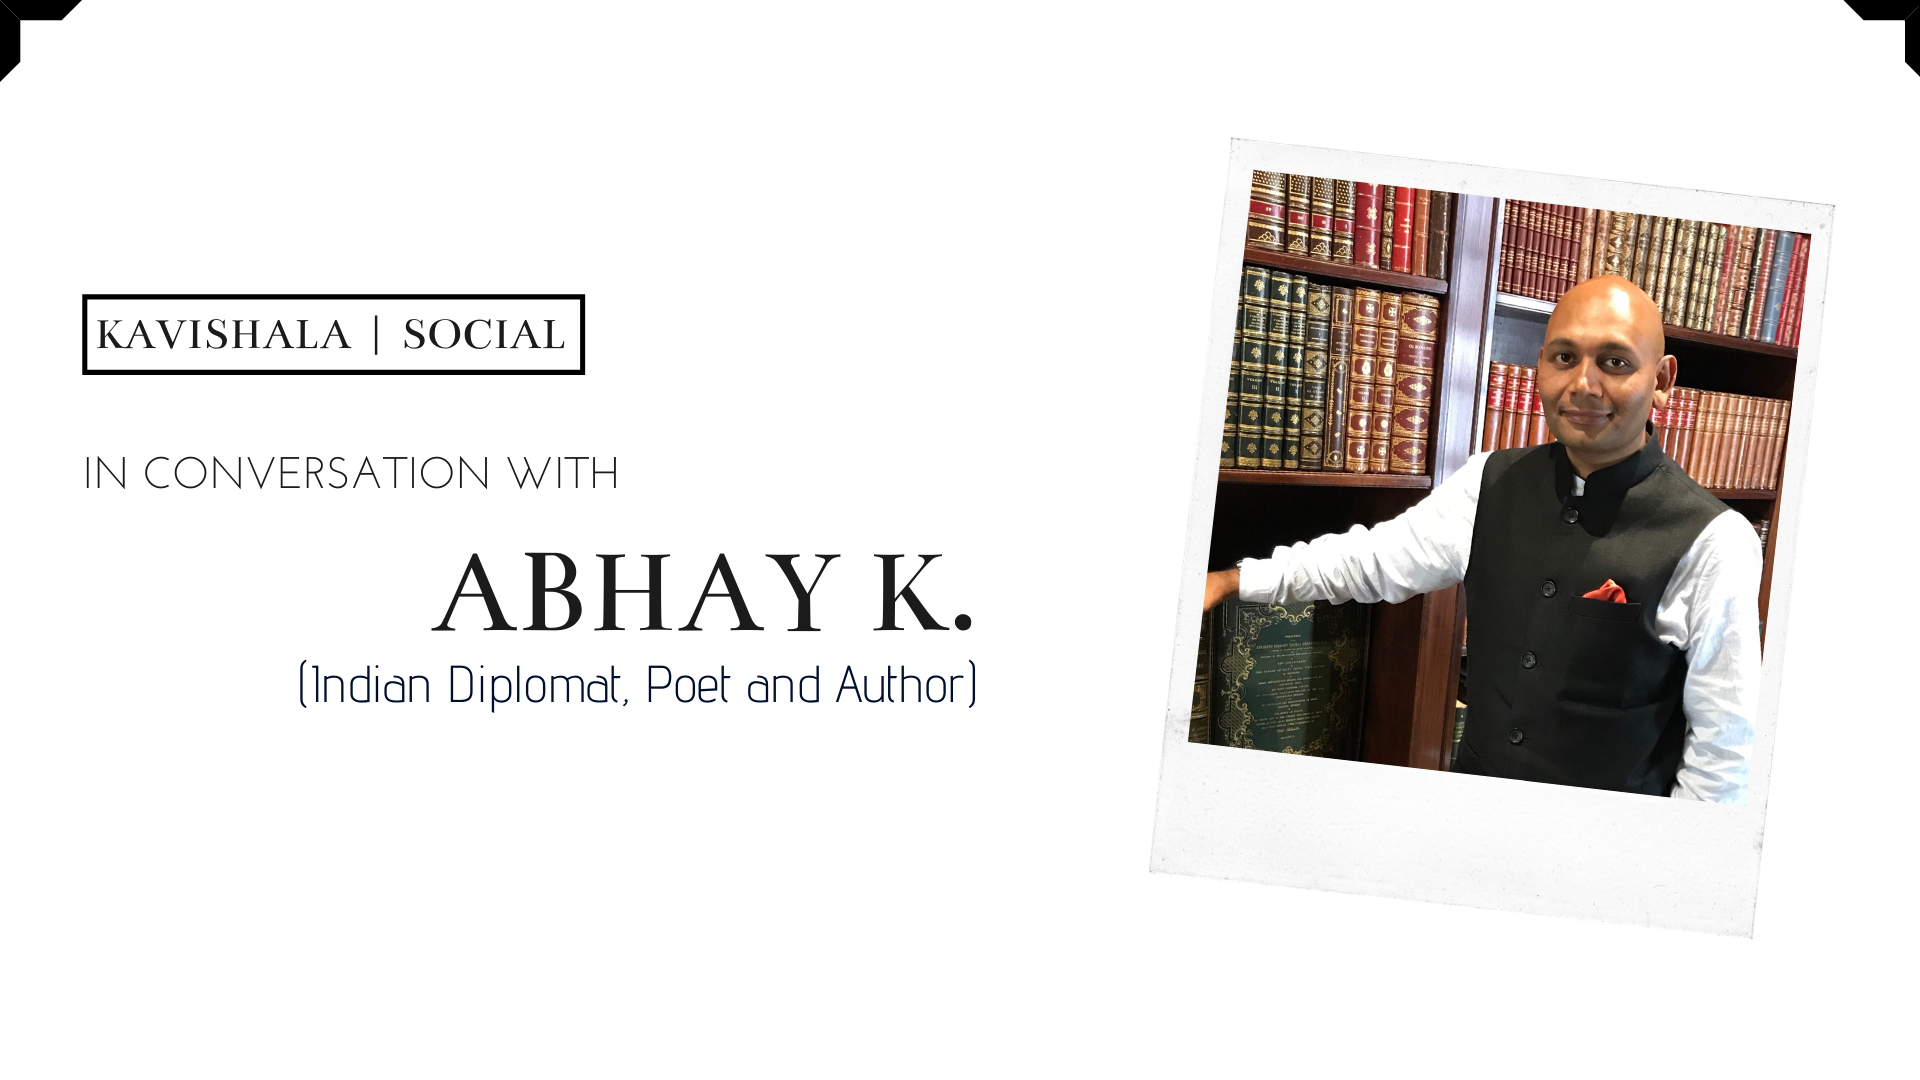 In Conversation with Indian Diplomat, Poet and Author Abhay K.'s image